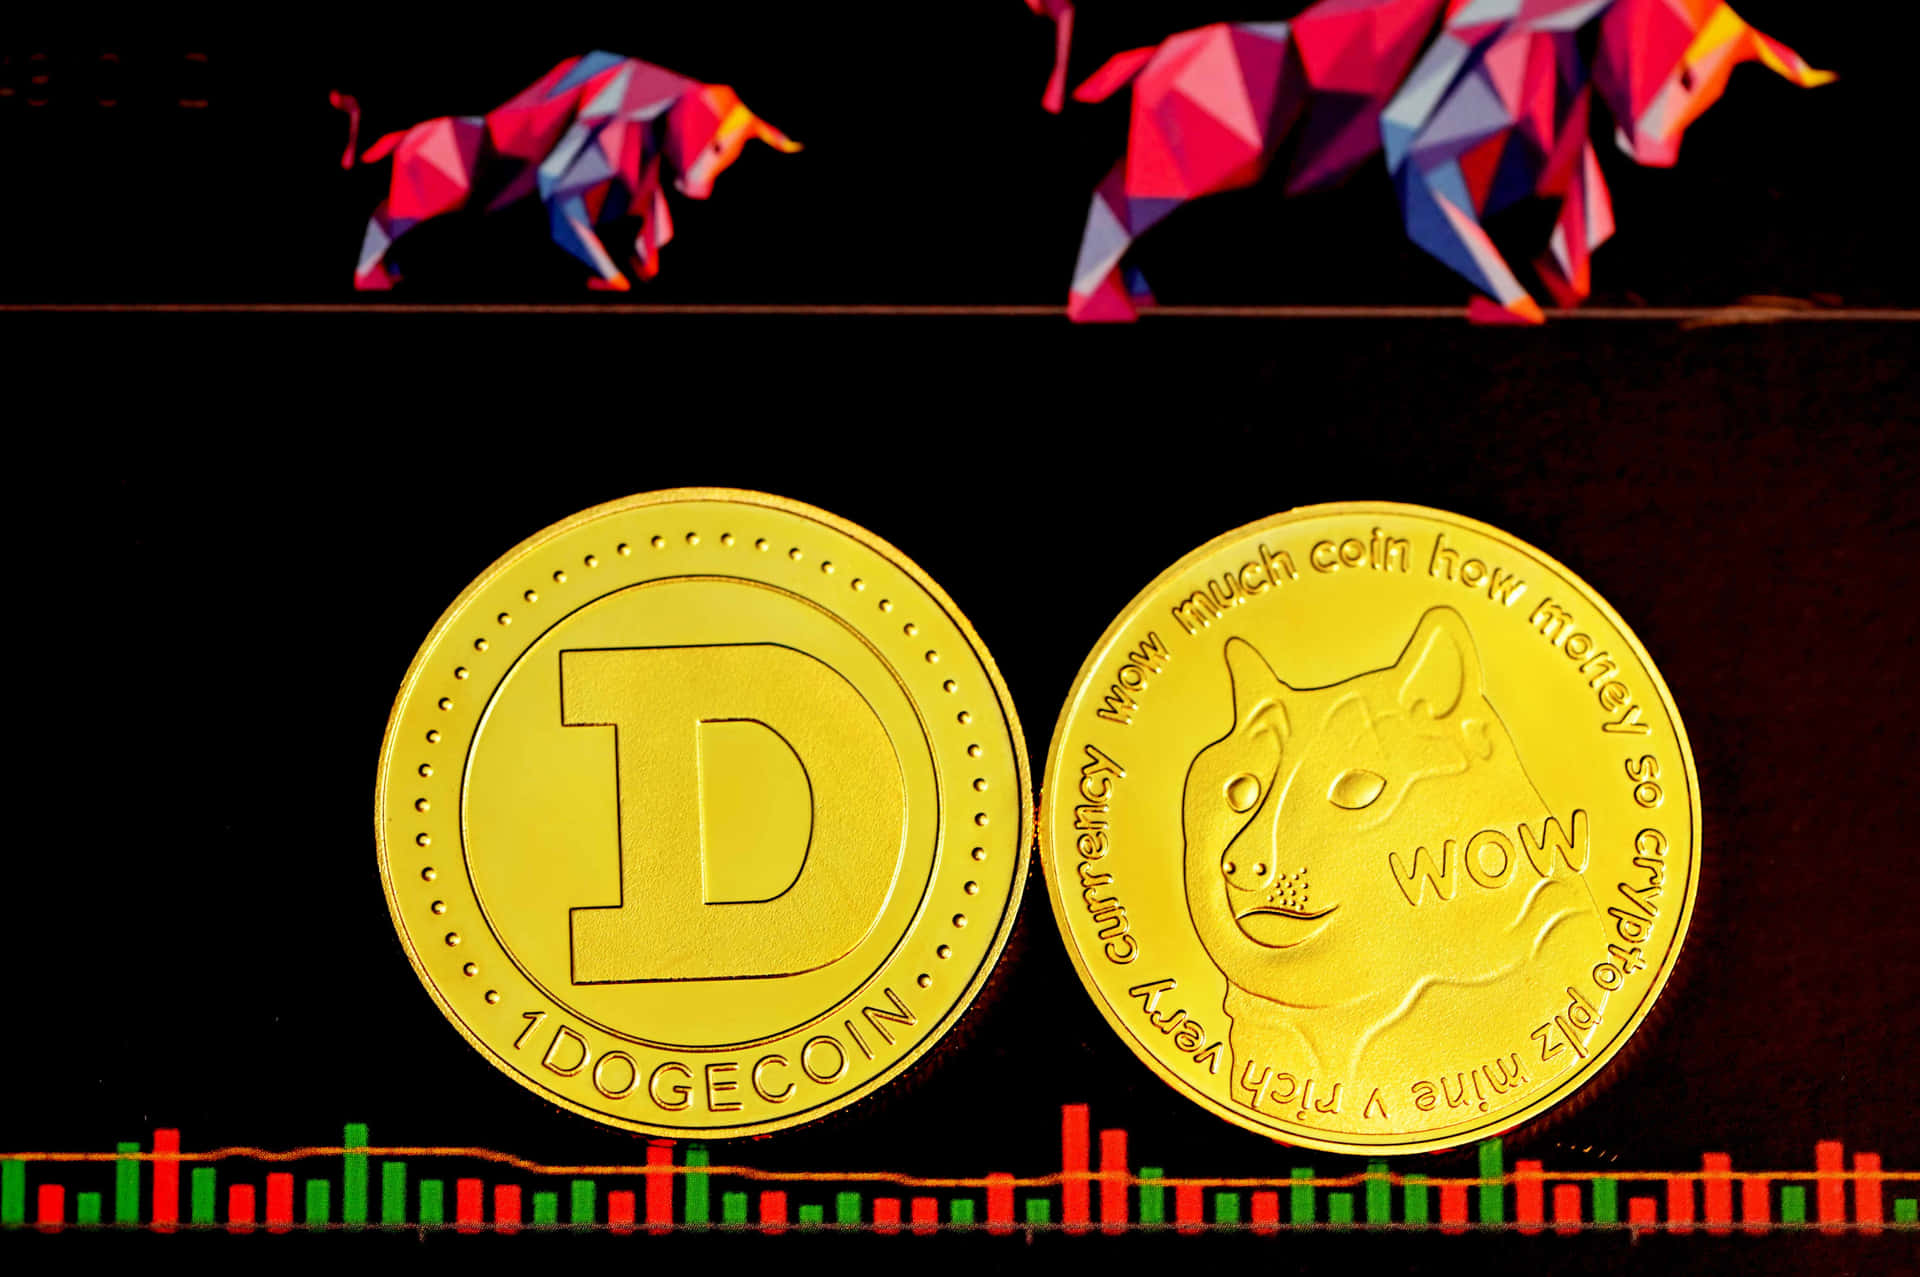 Dogecoin Symbol on Colorful Cosmic Background